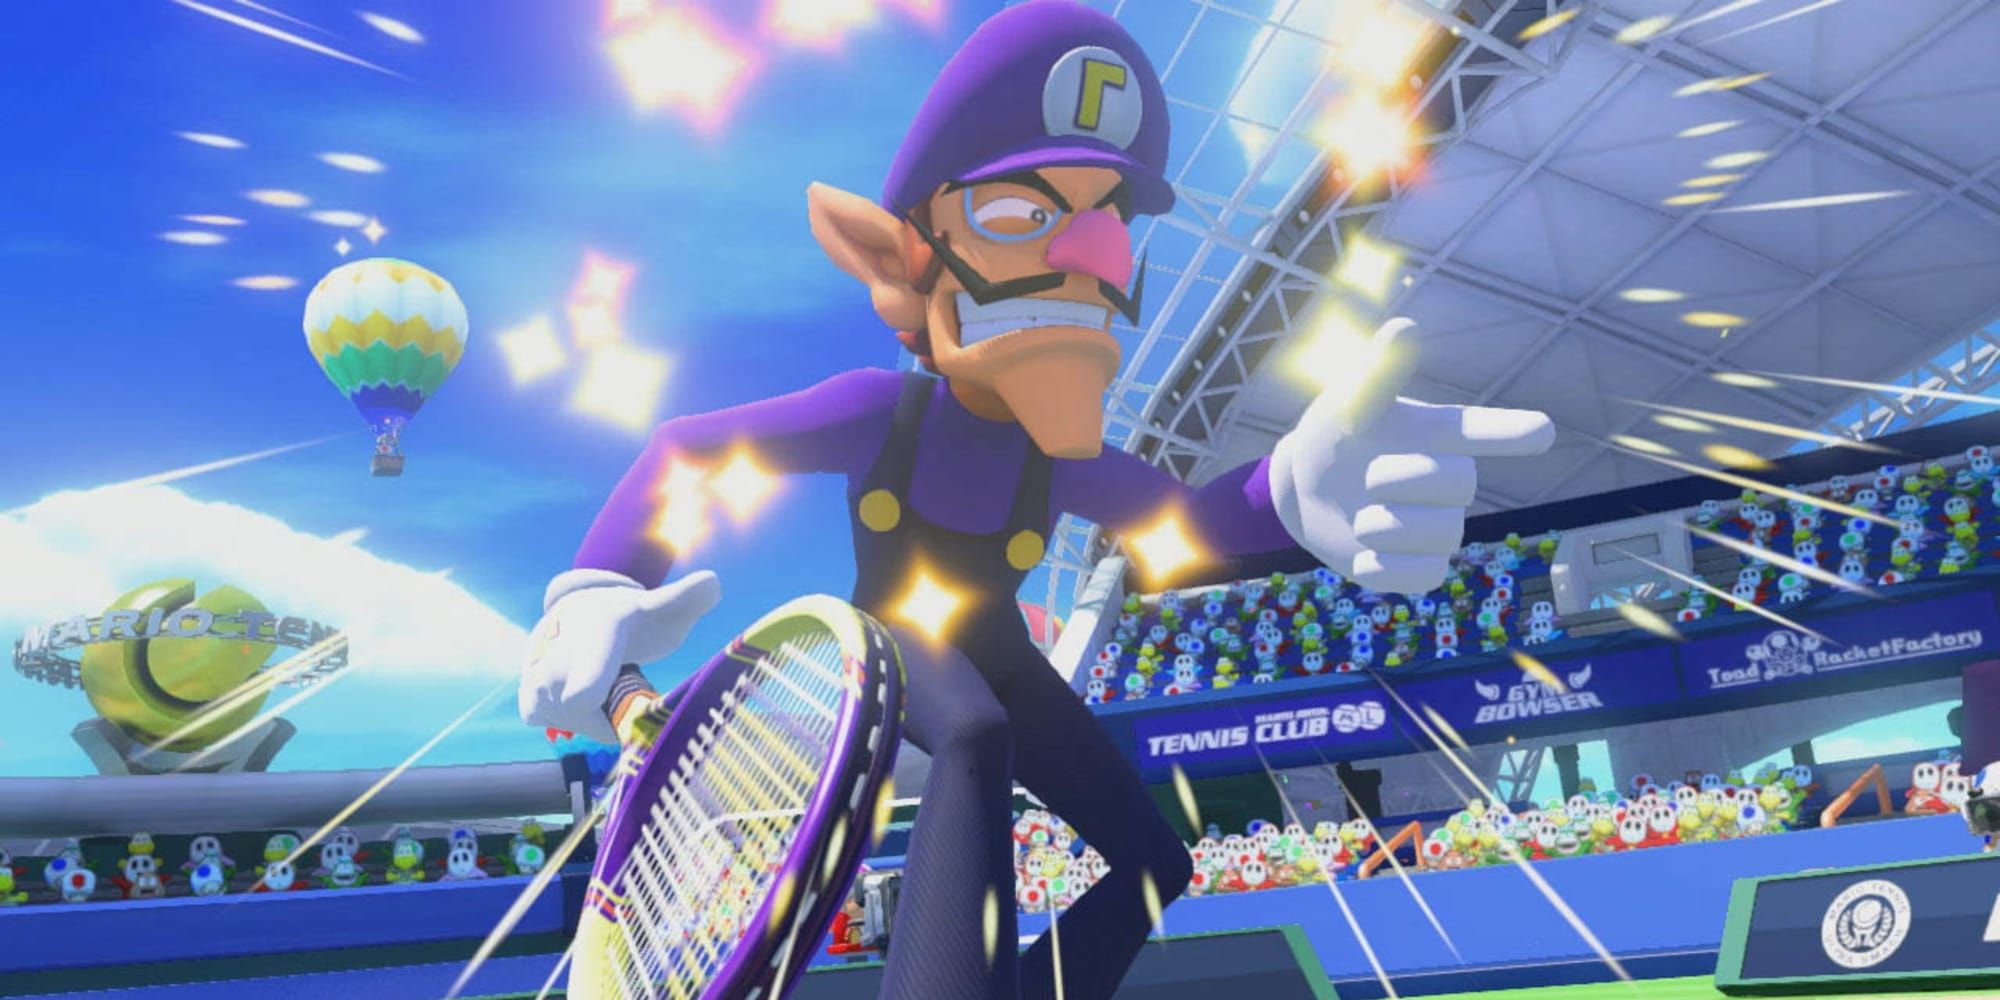 The infamous Waluigi from Mario Tennis: Ultra Smash for the Wii U.